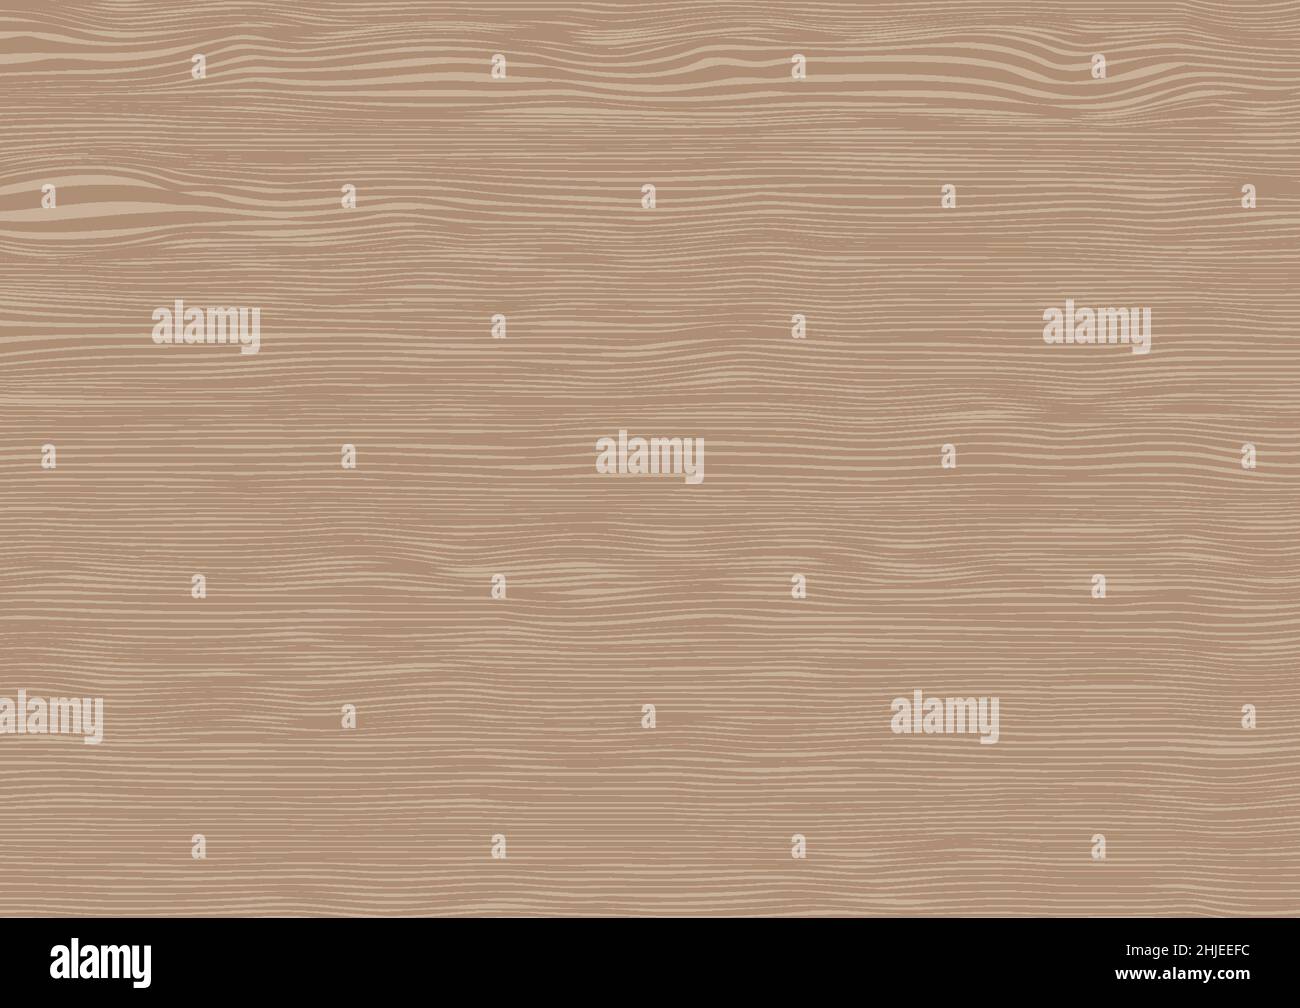 Natural wood texture vector. Abstract pattern background. Eligant material timber surface illustration. Floor, wall, furniture interior design to use. Stock Vector